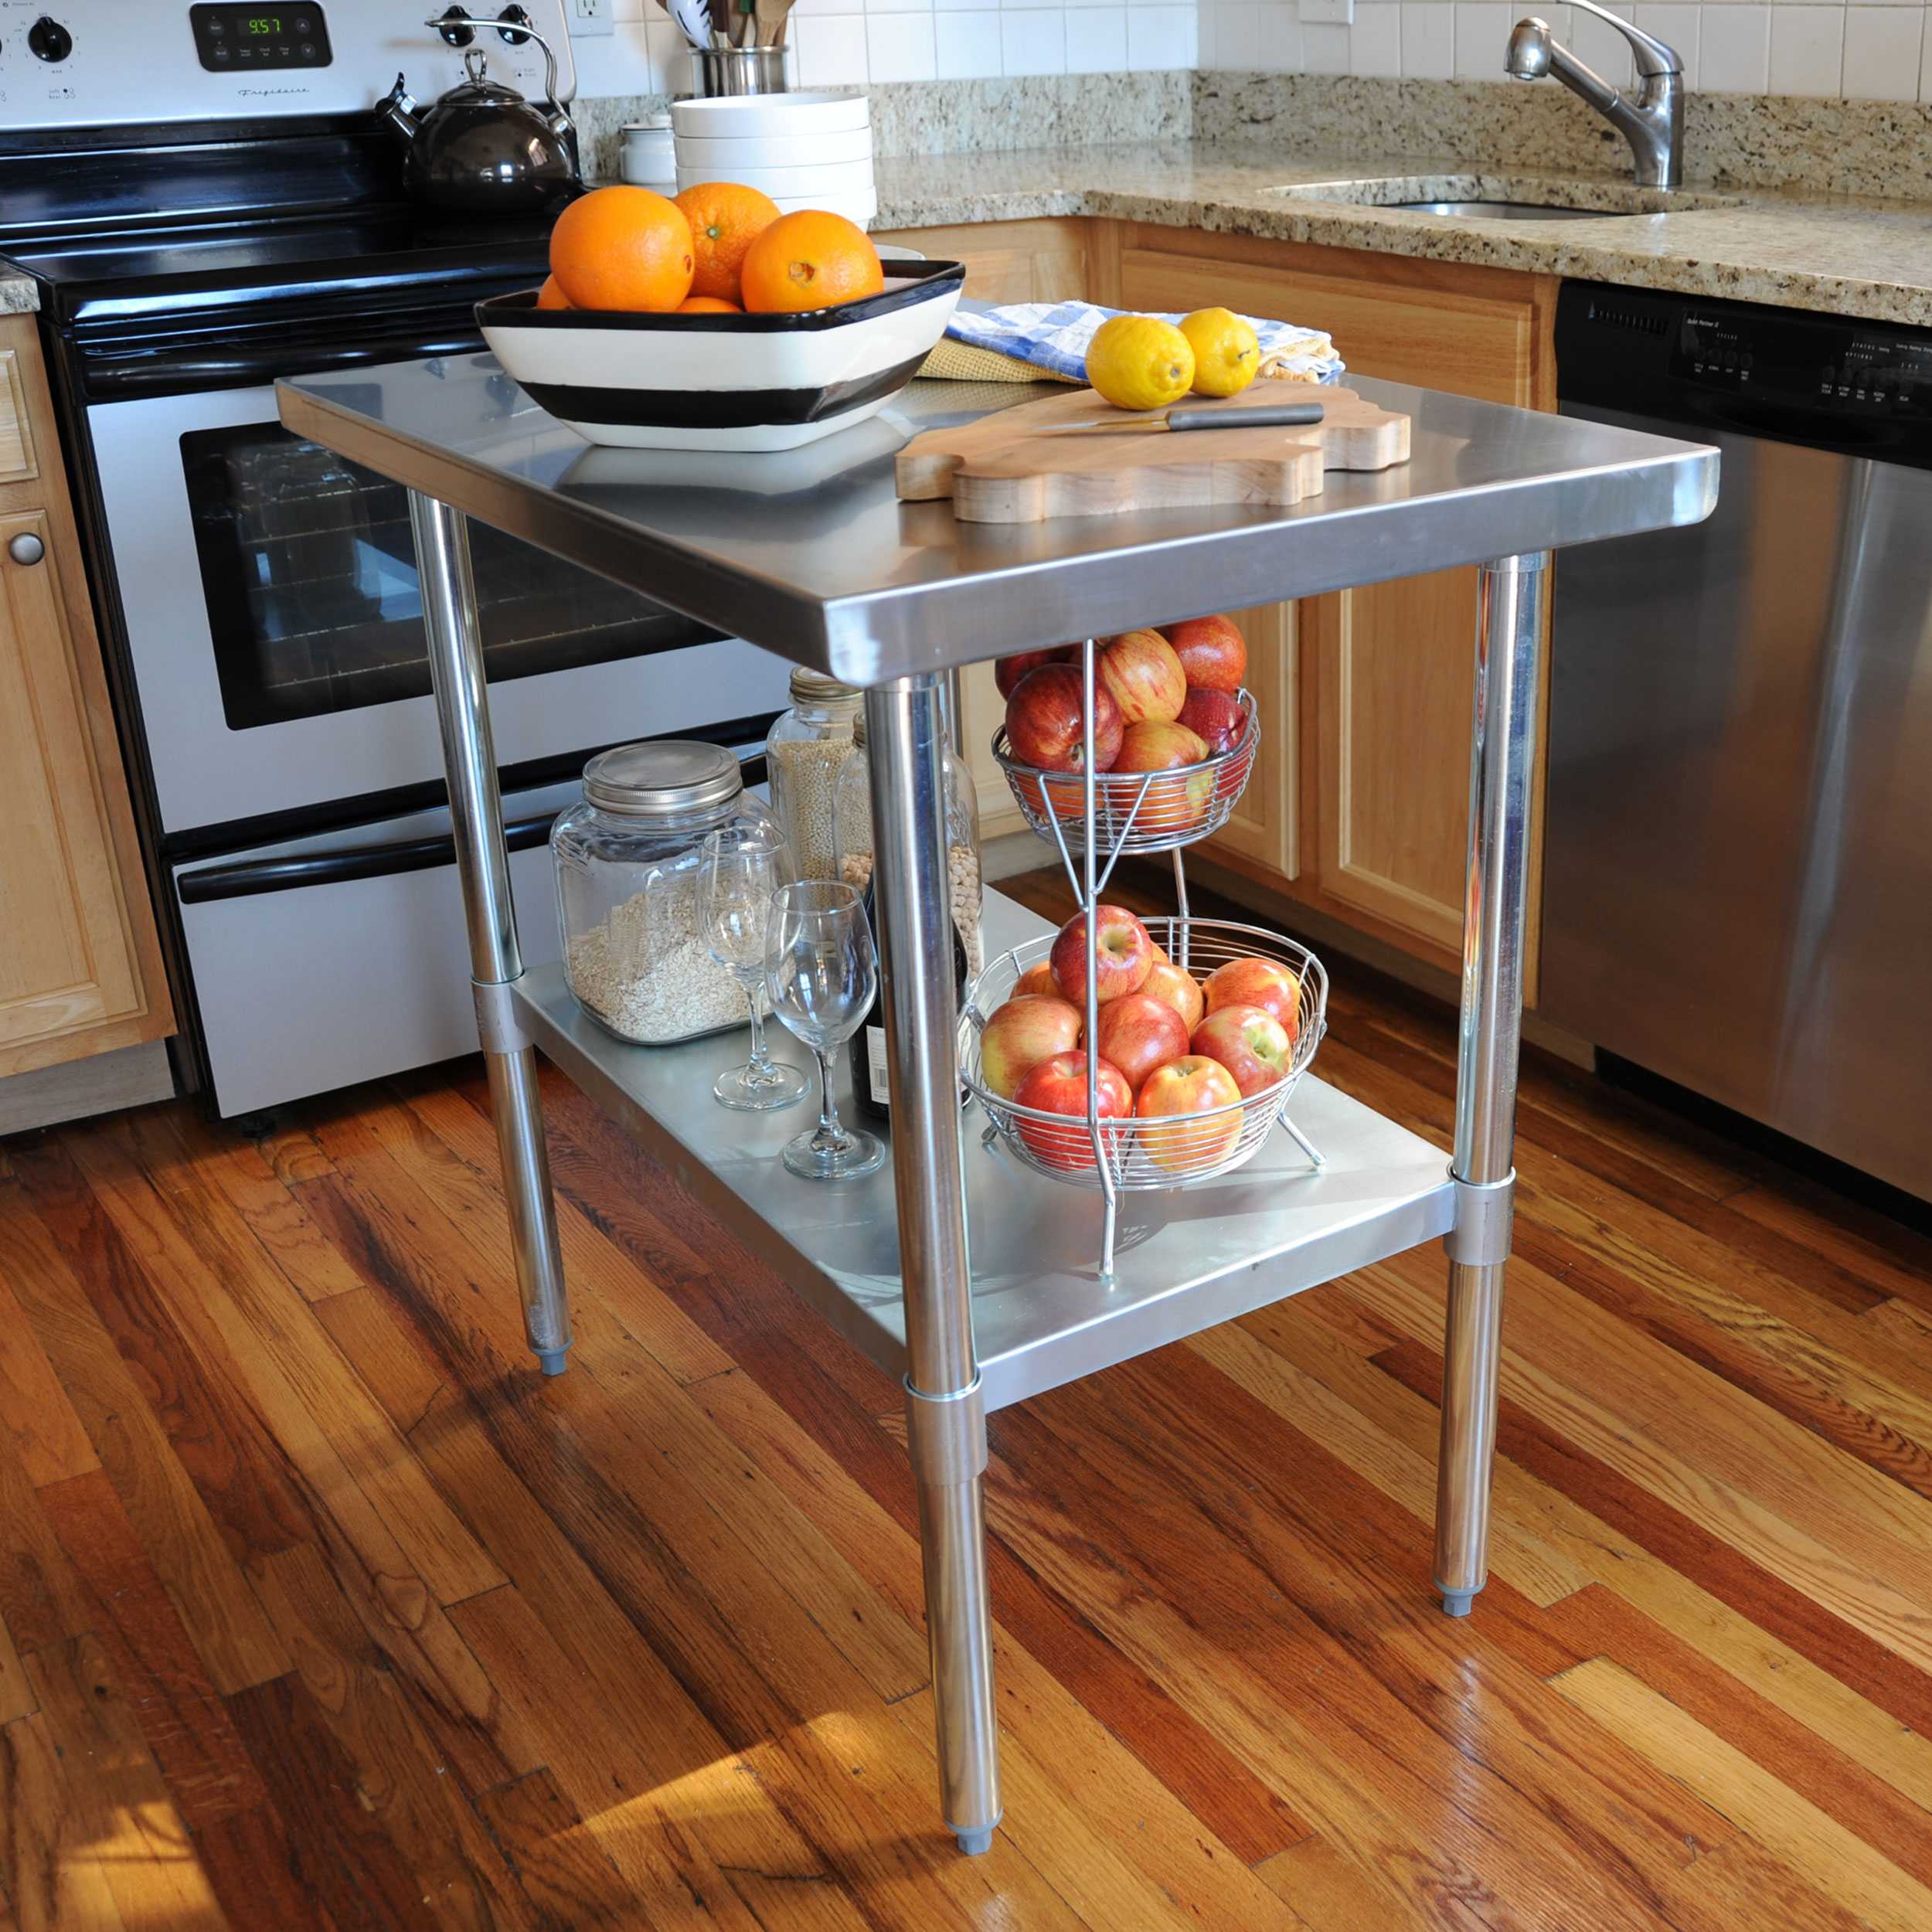 24" X 48" Stainless Steel Work Table